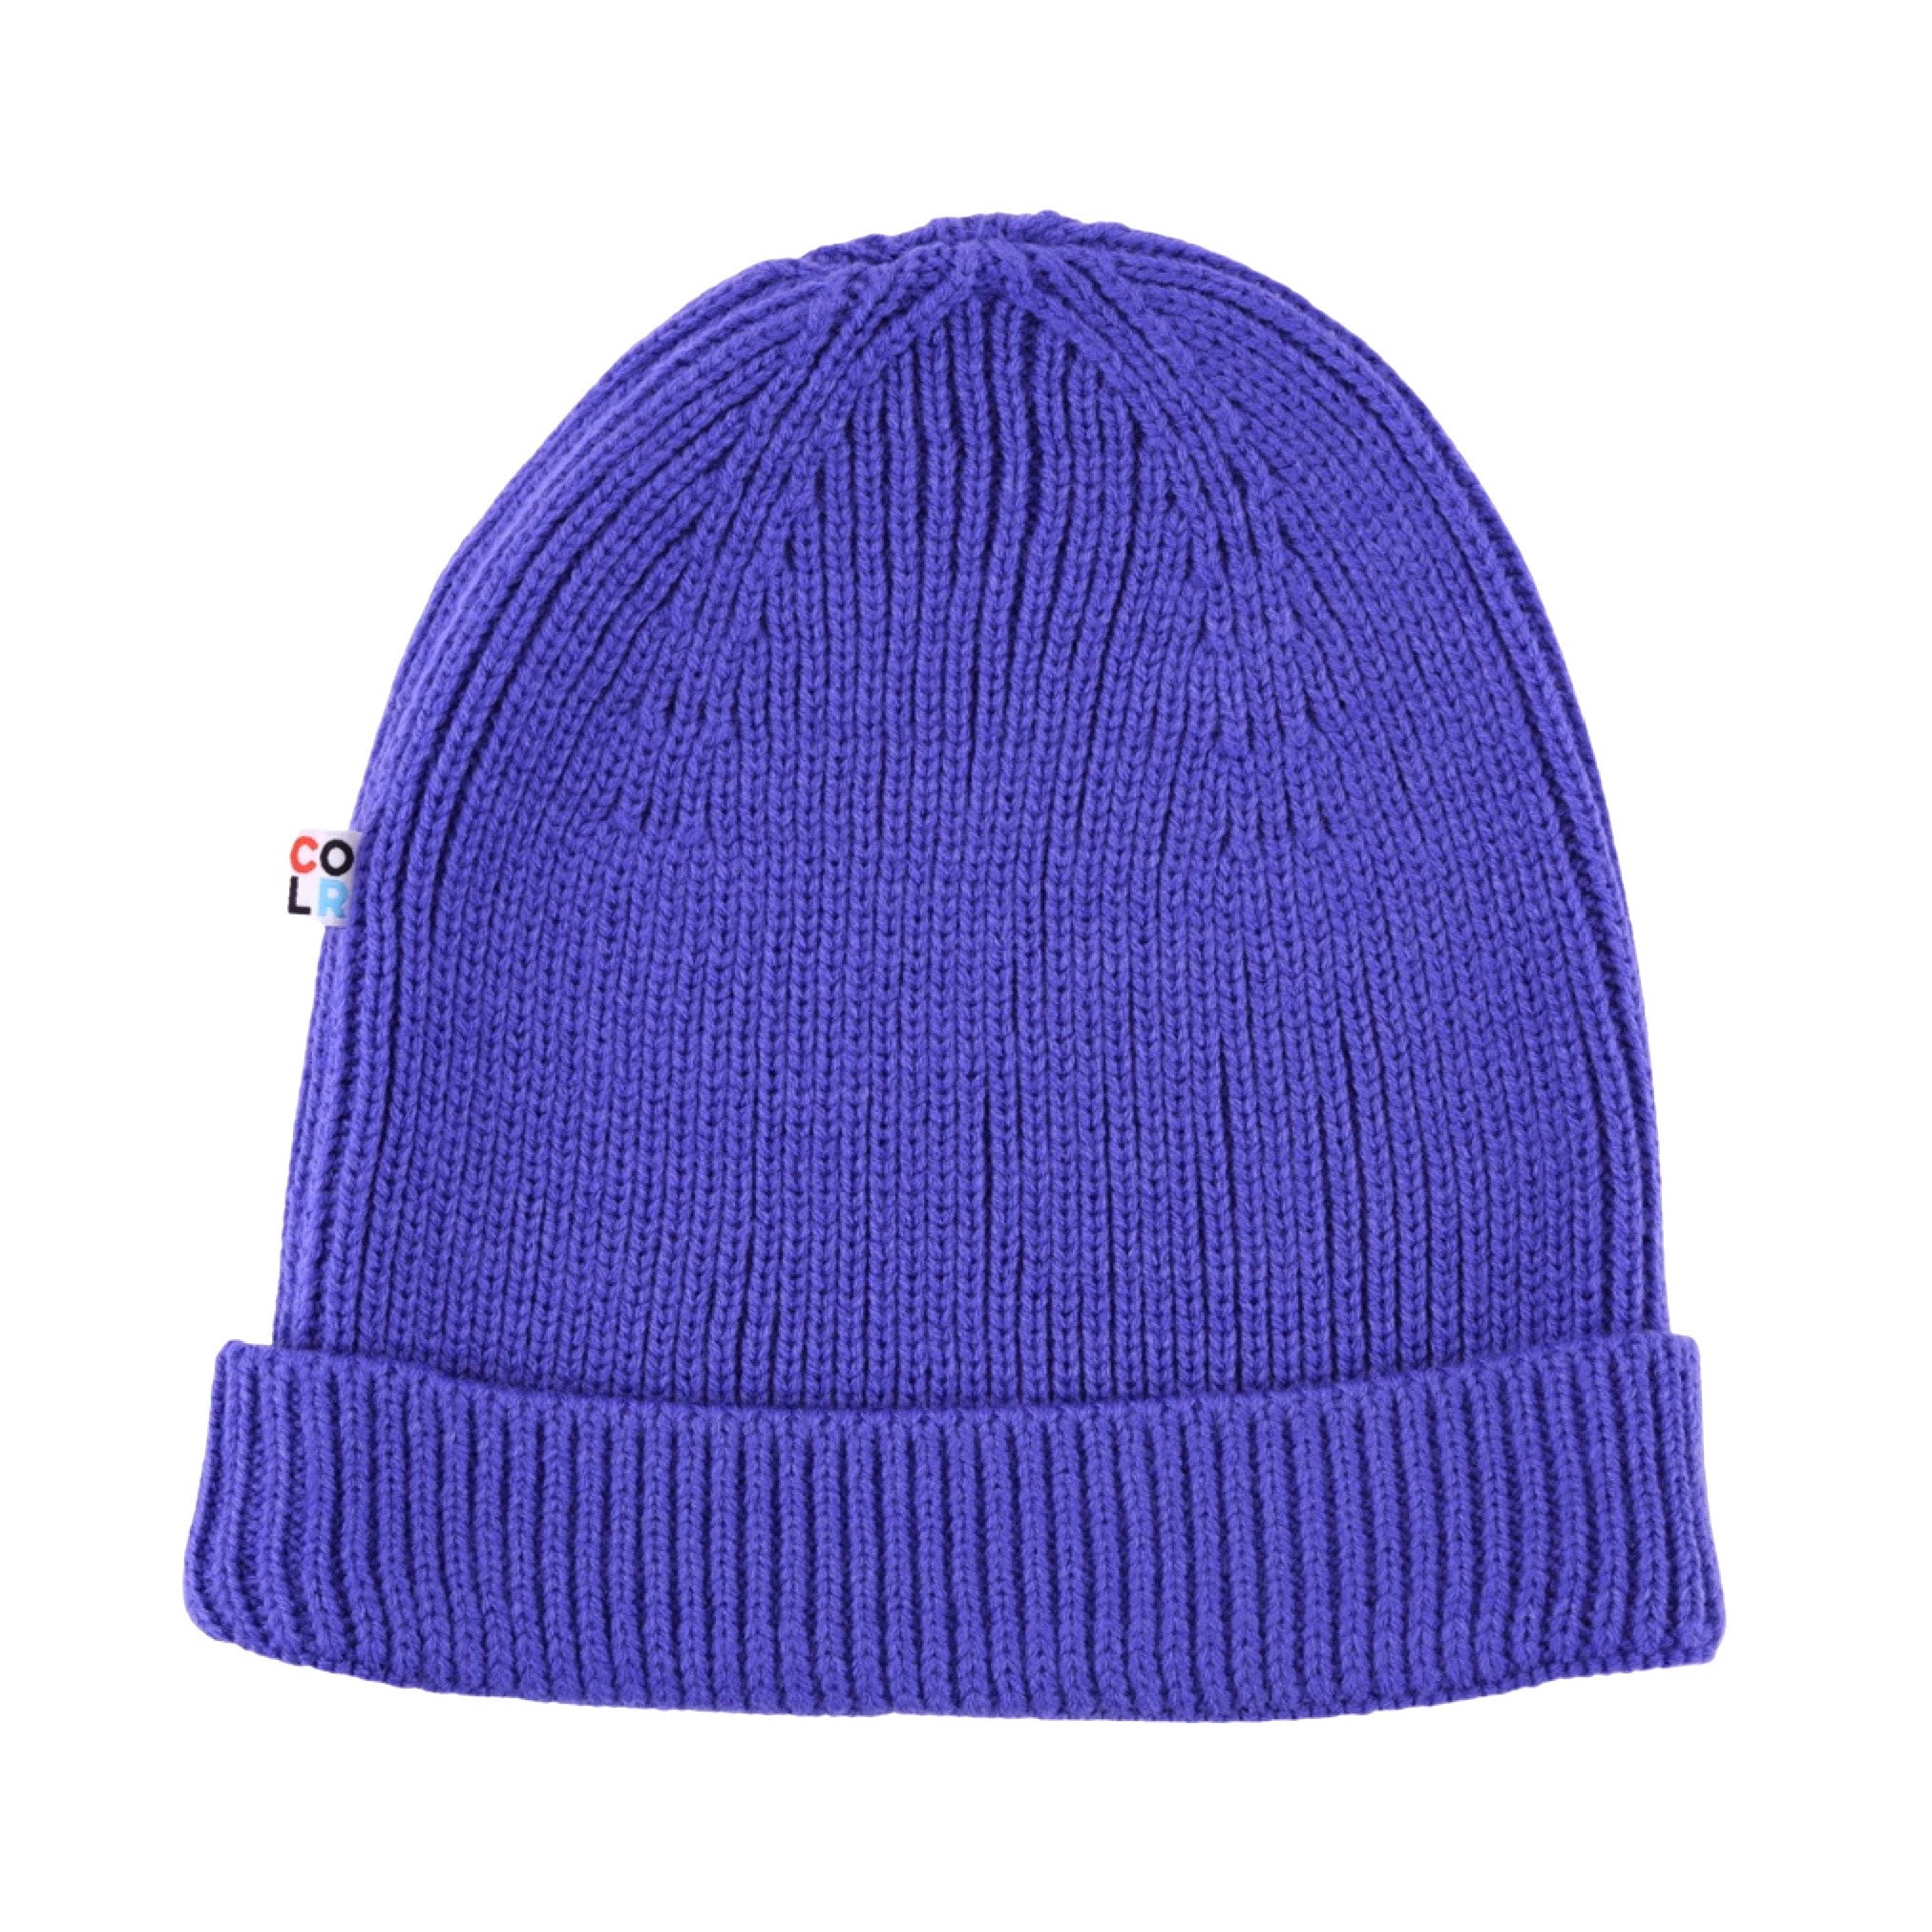 COLR by uLace Beanie - Bright Purple